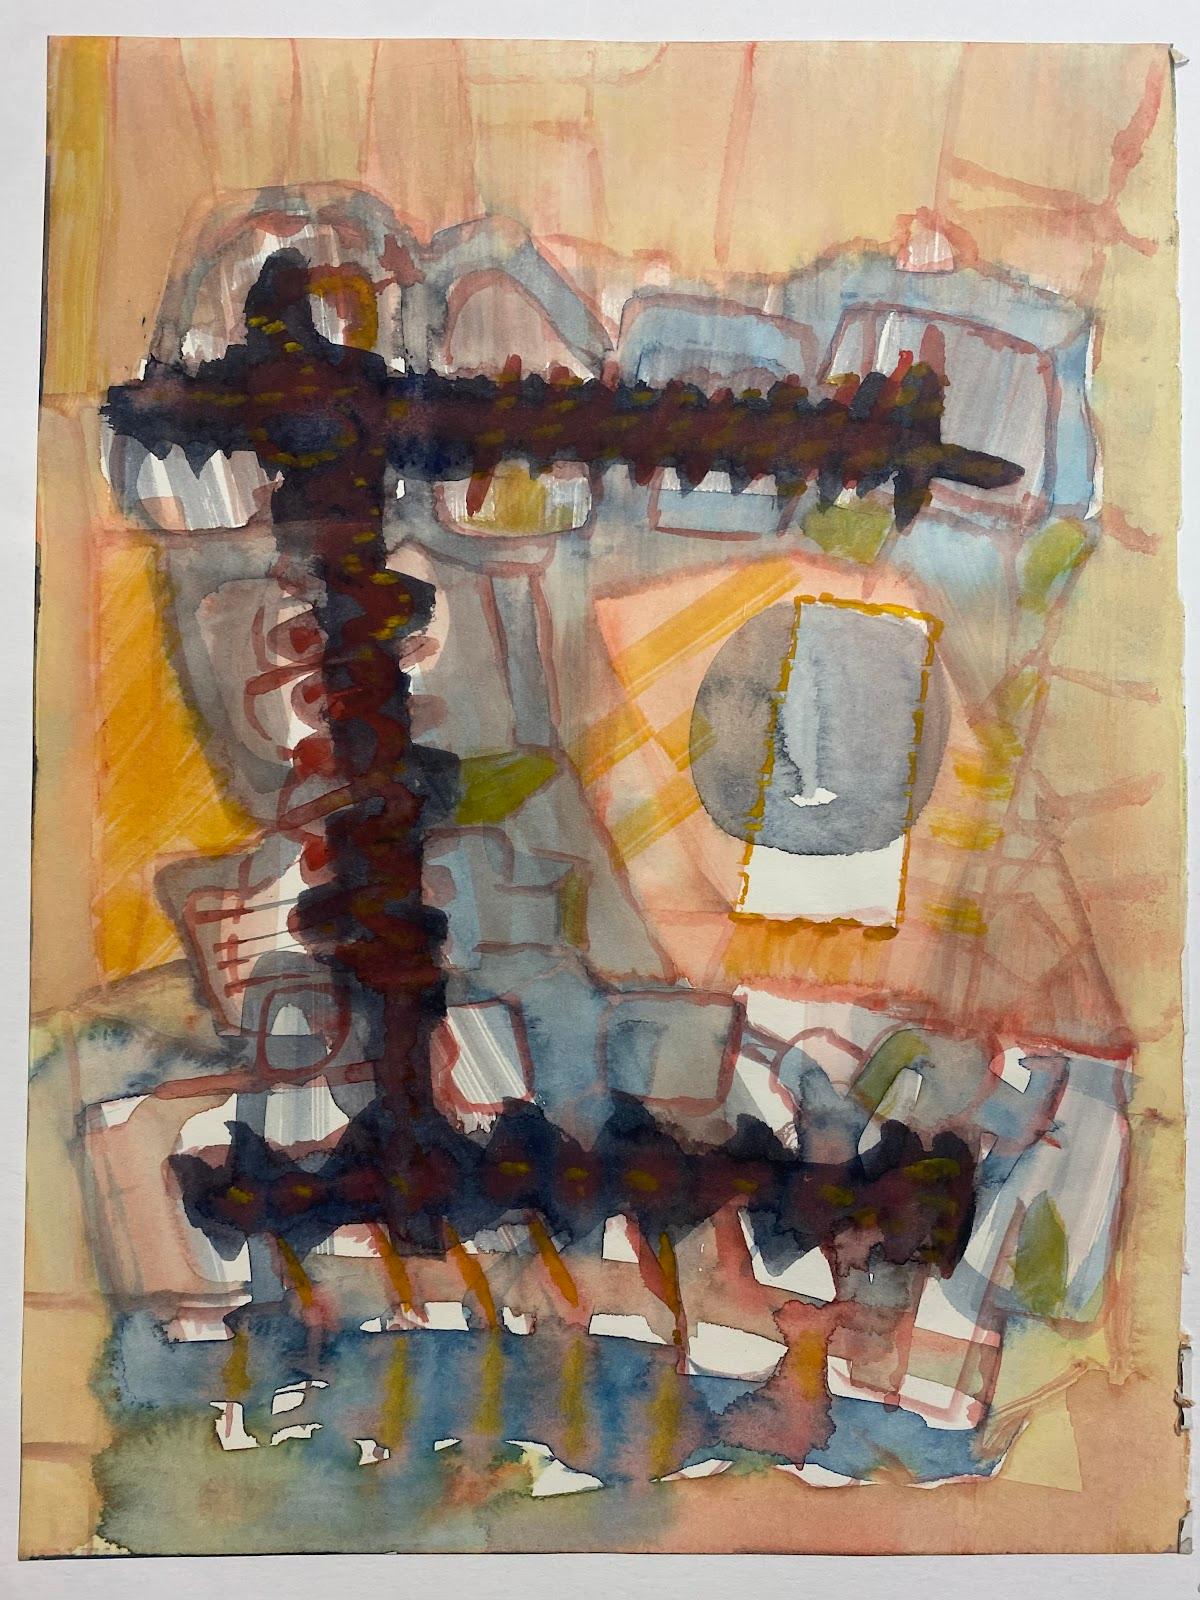 Abstract Expressionist Composition
by Jacques COULAIS (1955-2011)
gouache painting on paper/ card
unframed: 19.5 x 13 inches
condition: excellent
provenance: all the paintings we have for sale by this artist have come from the artists studio and are